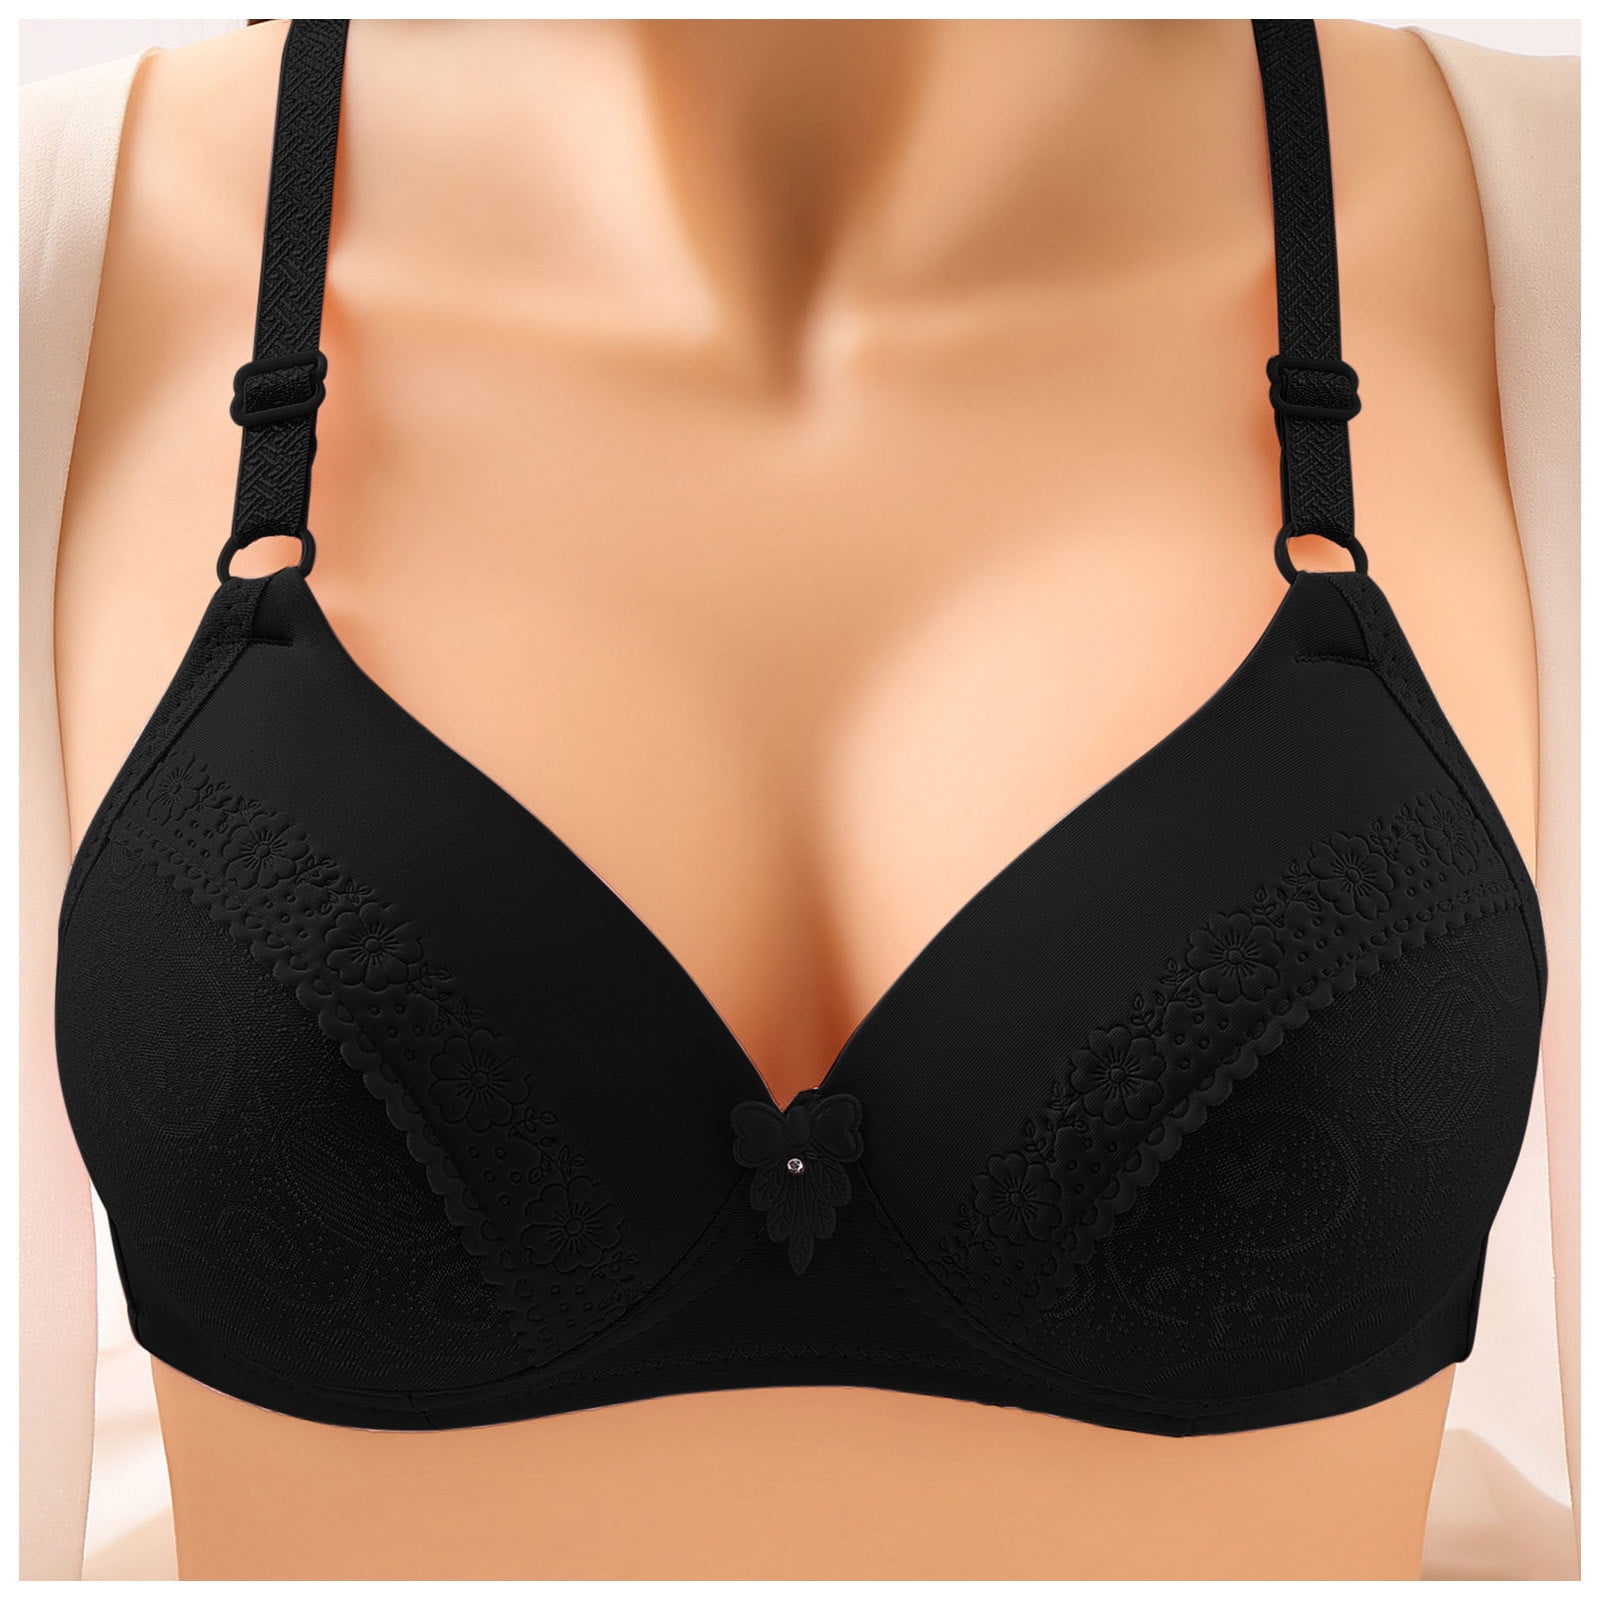 Women's Bras No Steel Ring Thin Cup Comfortable Push Up Bras for